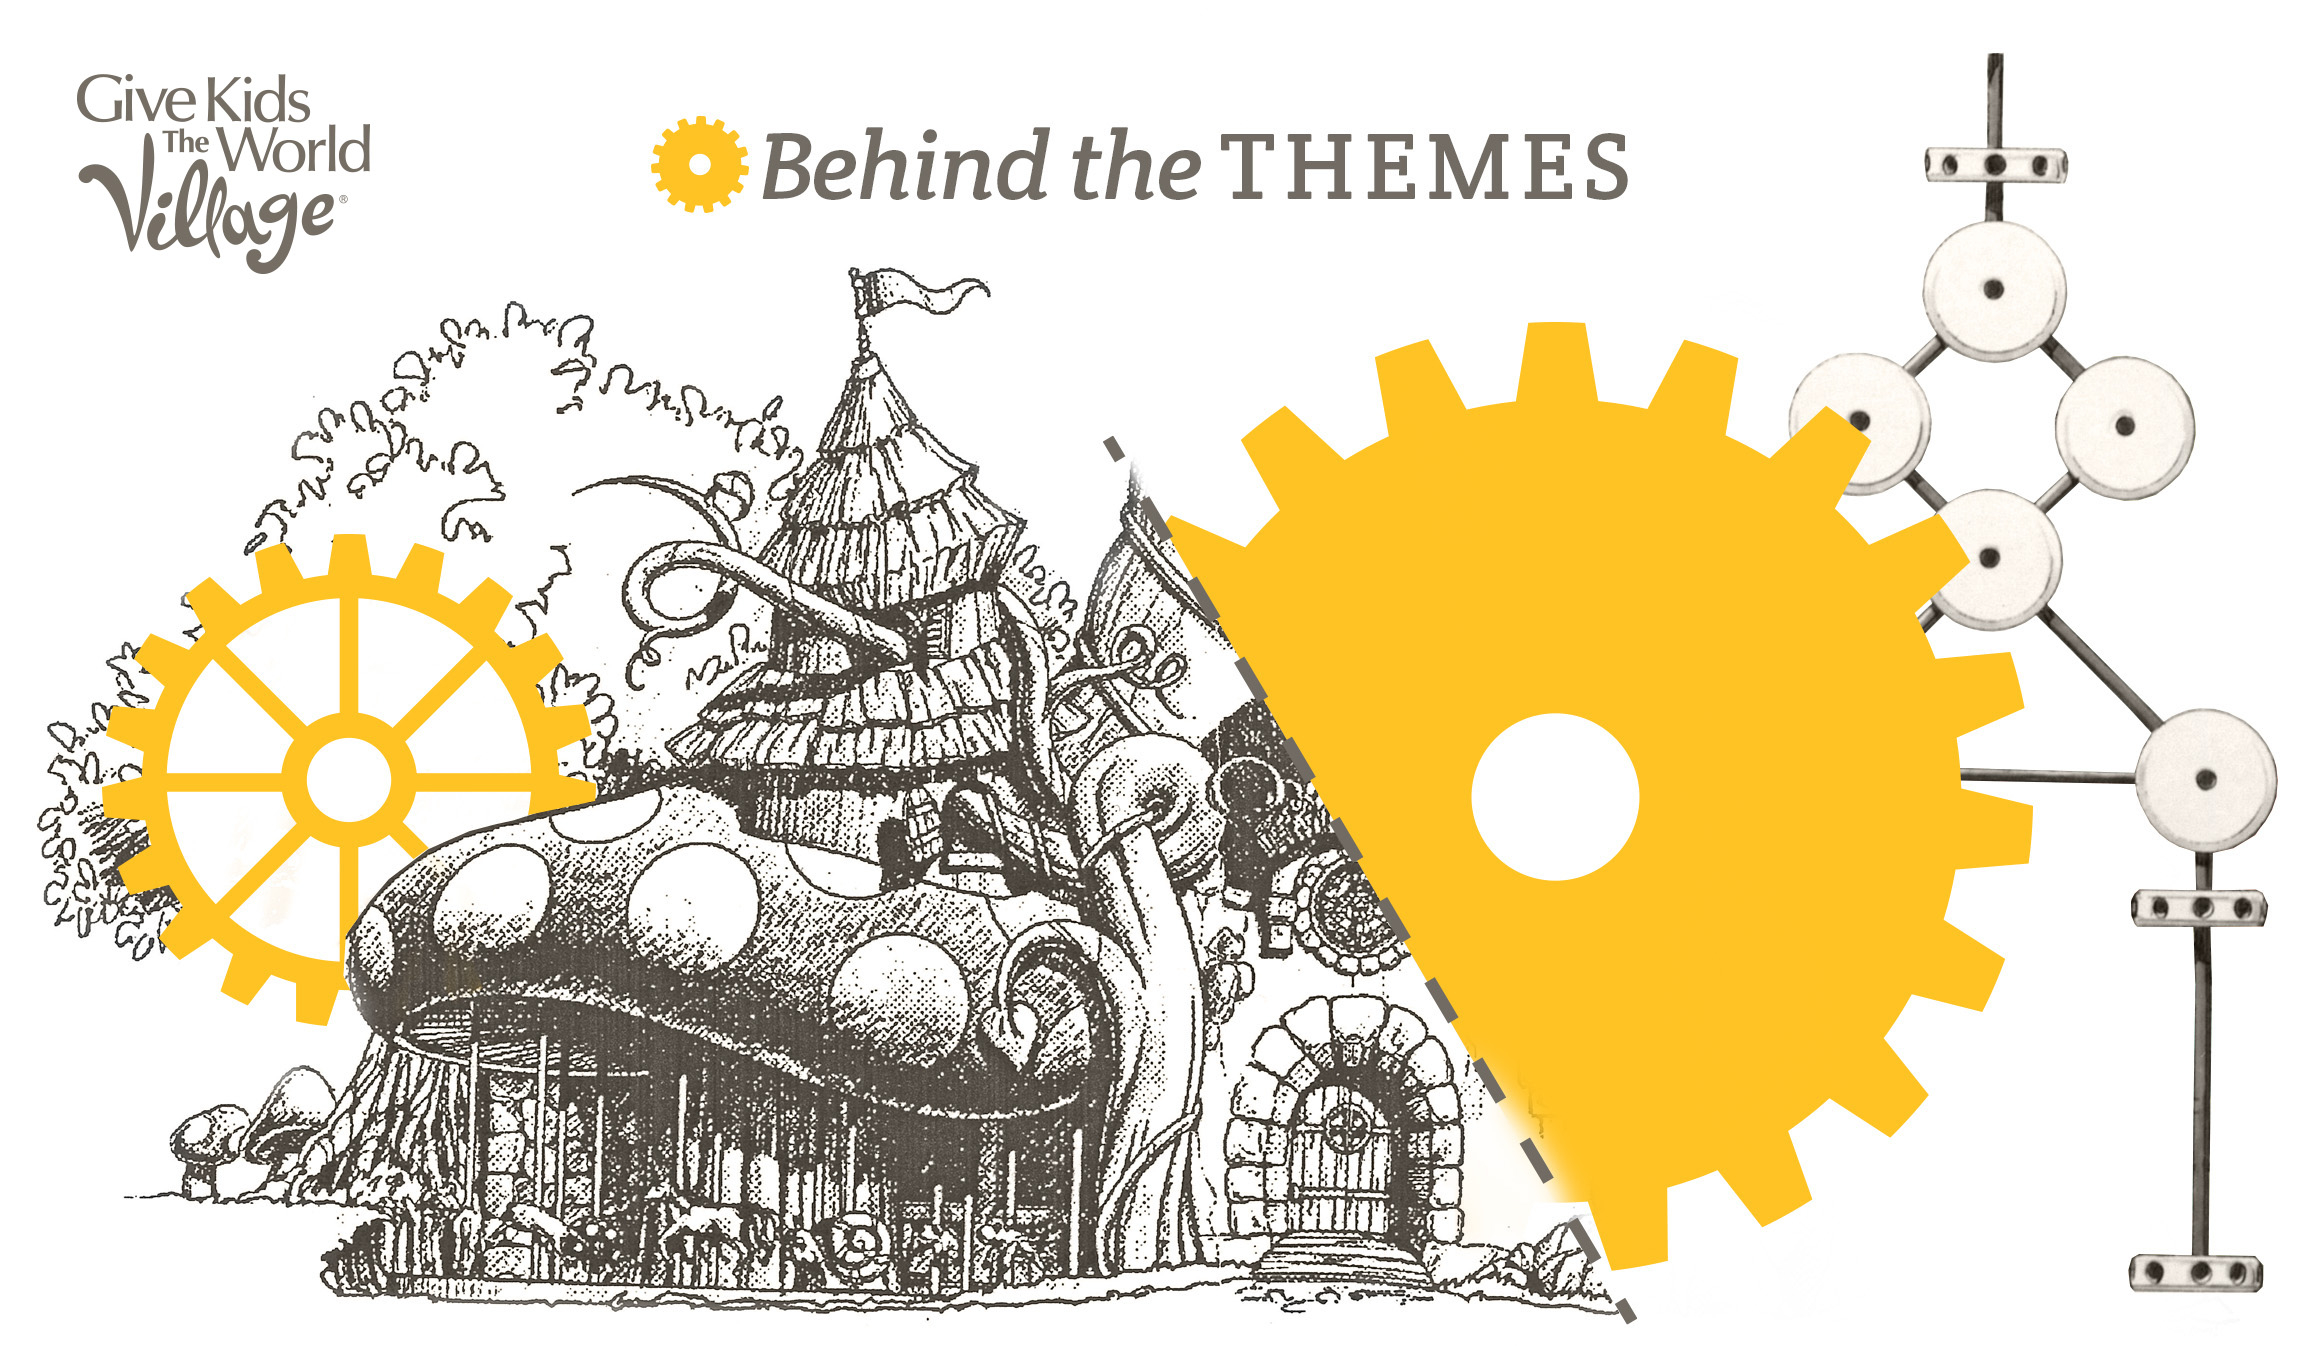 Behind the Themes Tours